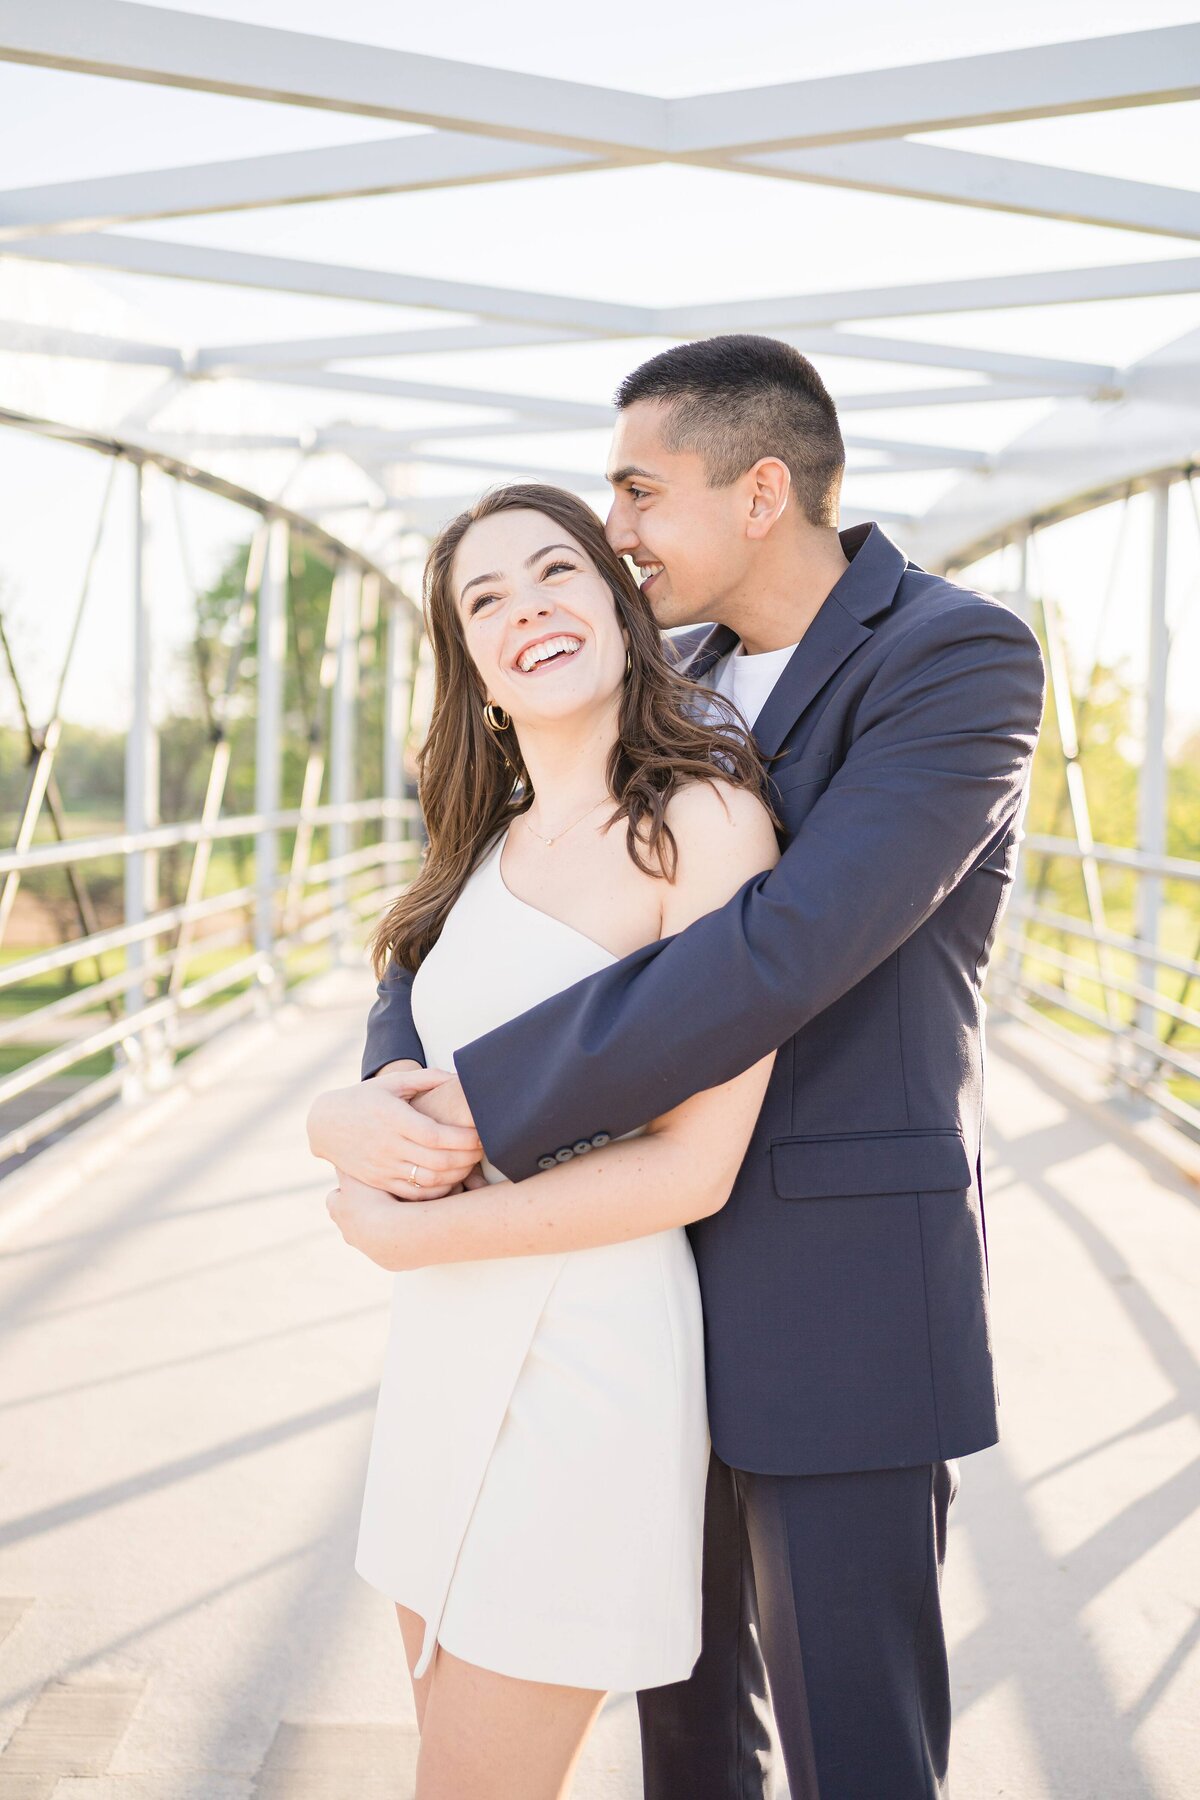 Katie-Whitcomb-Photography-chicago-engagement-session-Marie-Barret-015